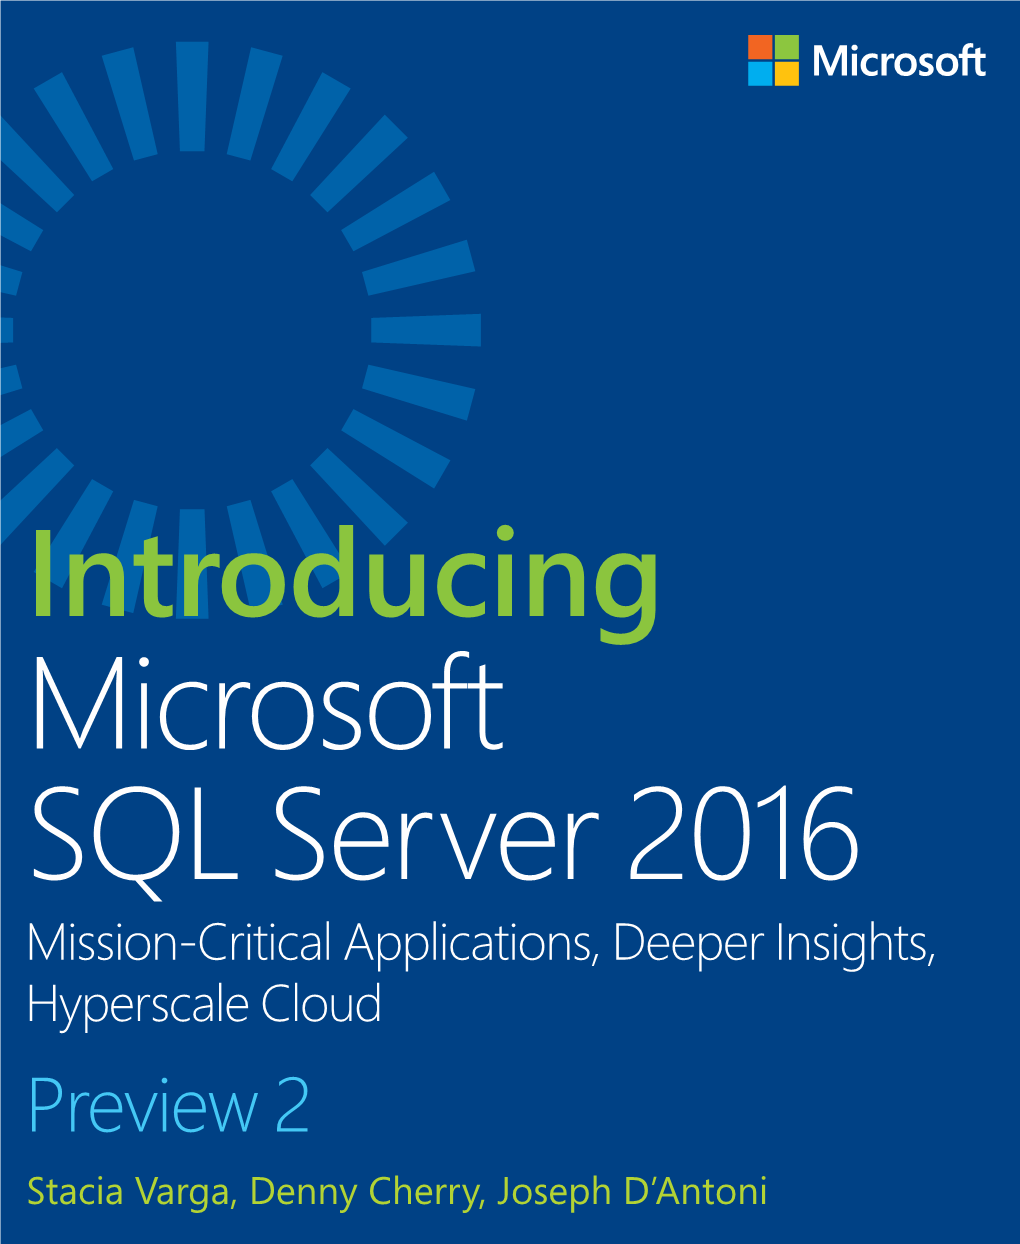 Introducing Microsoft SQL Server 2016 Mission-Critical Applications, Deeper Insights, Hyperscale Cloud Preview 2 Stacia Varga, Denny Cherry, Joseph D’Antoni 1